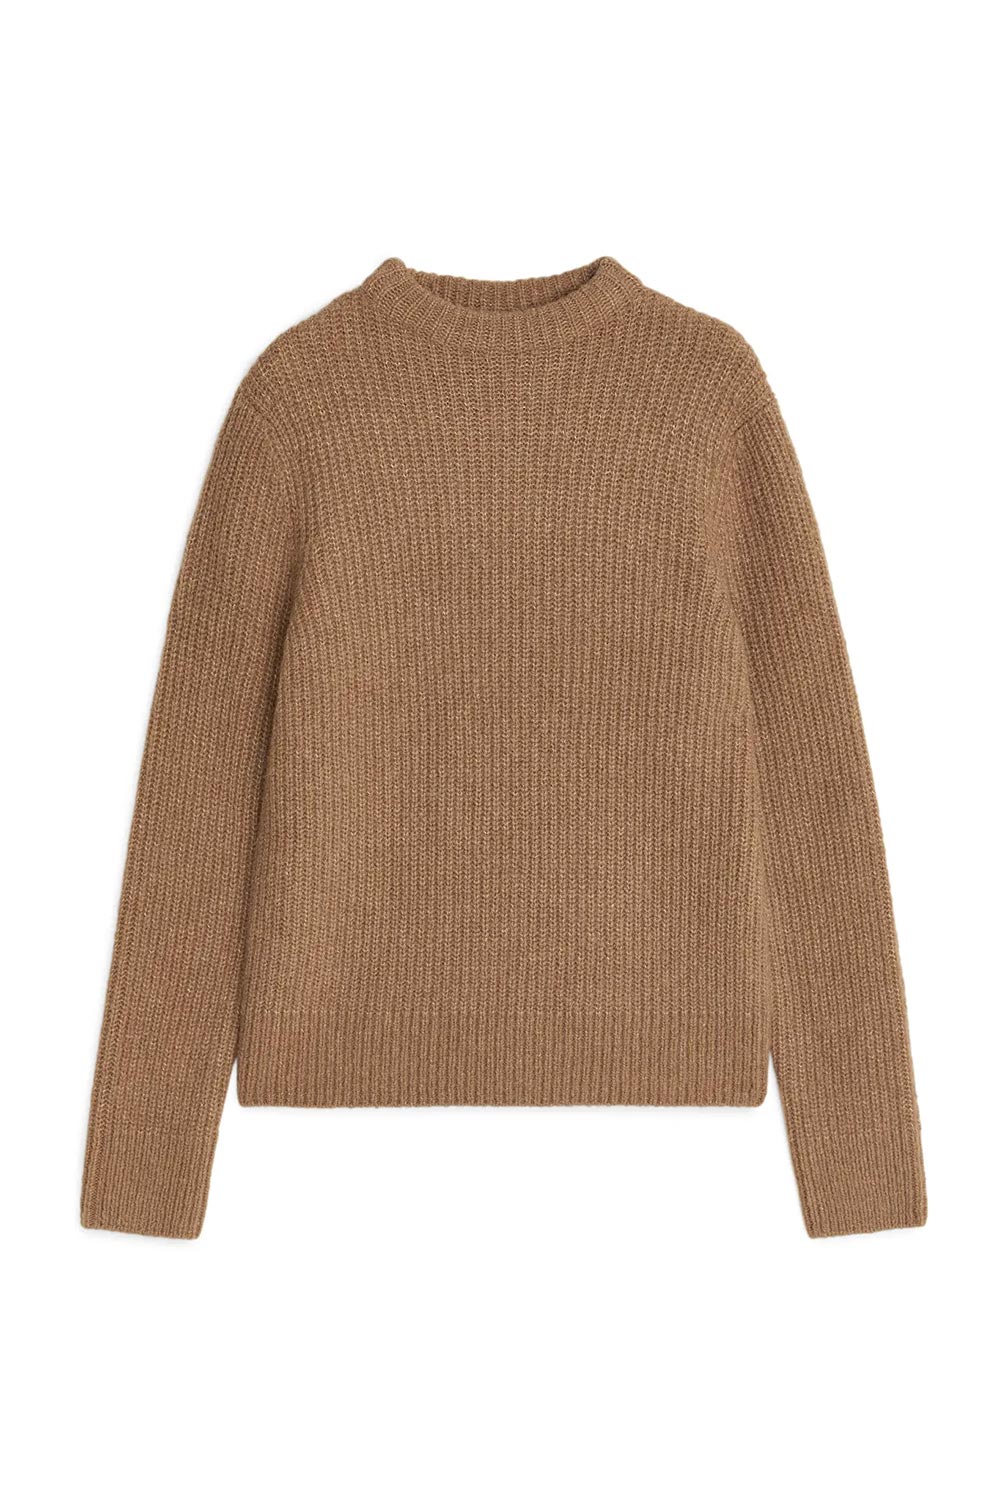 The Best Cosy Sweaters To Survive The Winter In | Marie Claire UK